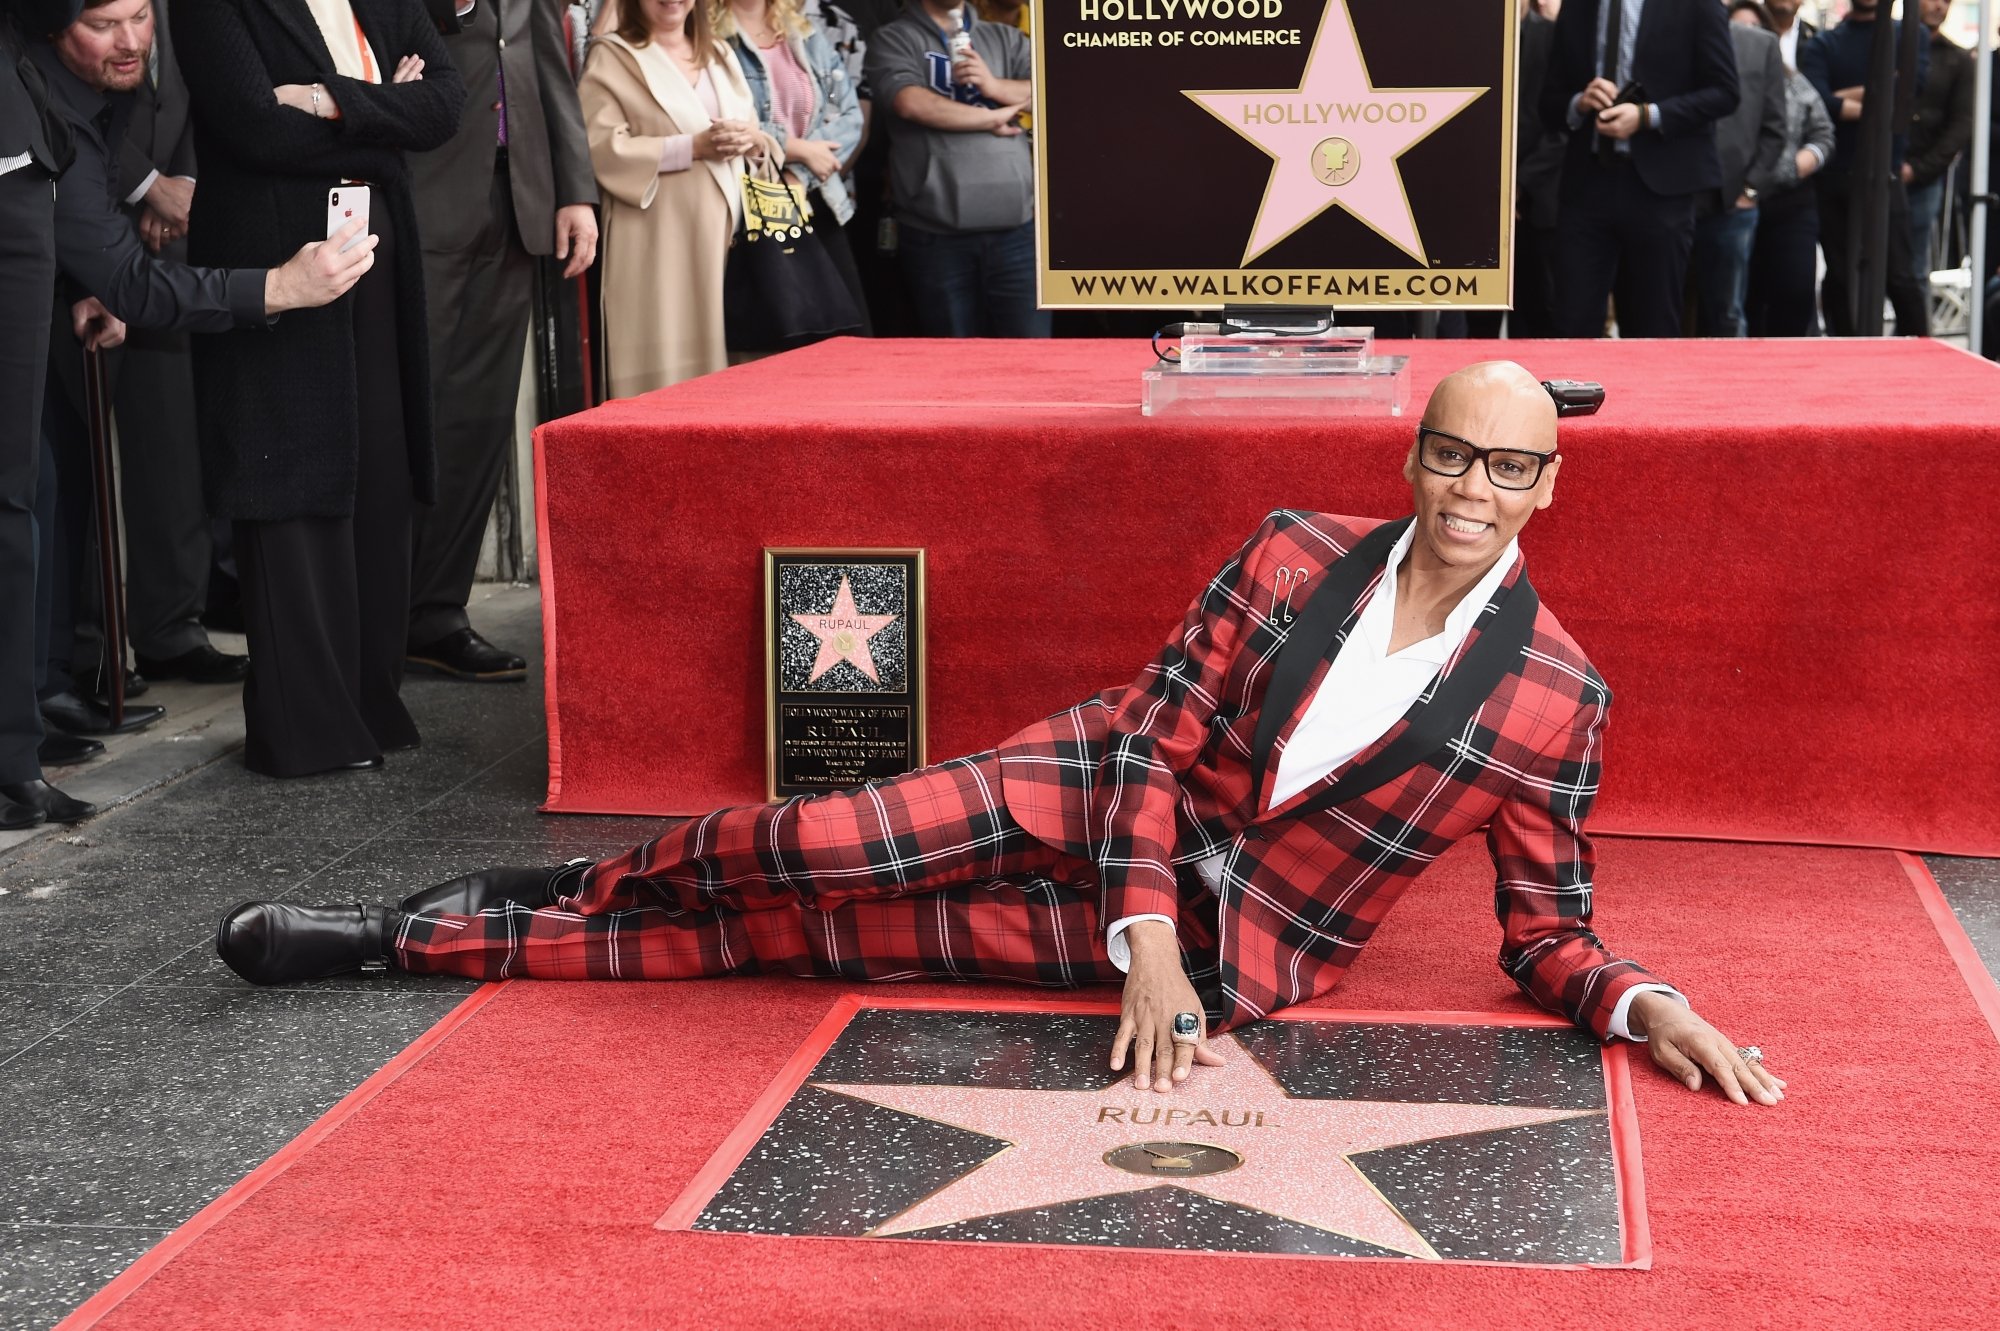 'RuPaul's Drag Race' host RuPaul laying down in front of Hollywood star